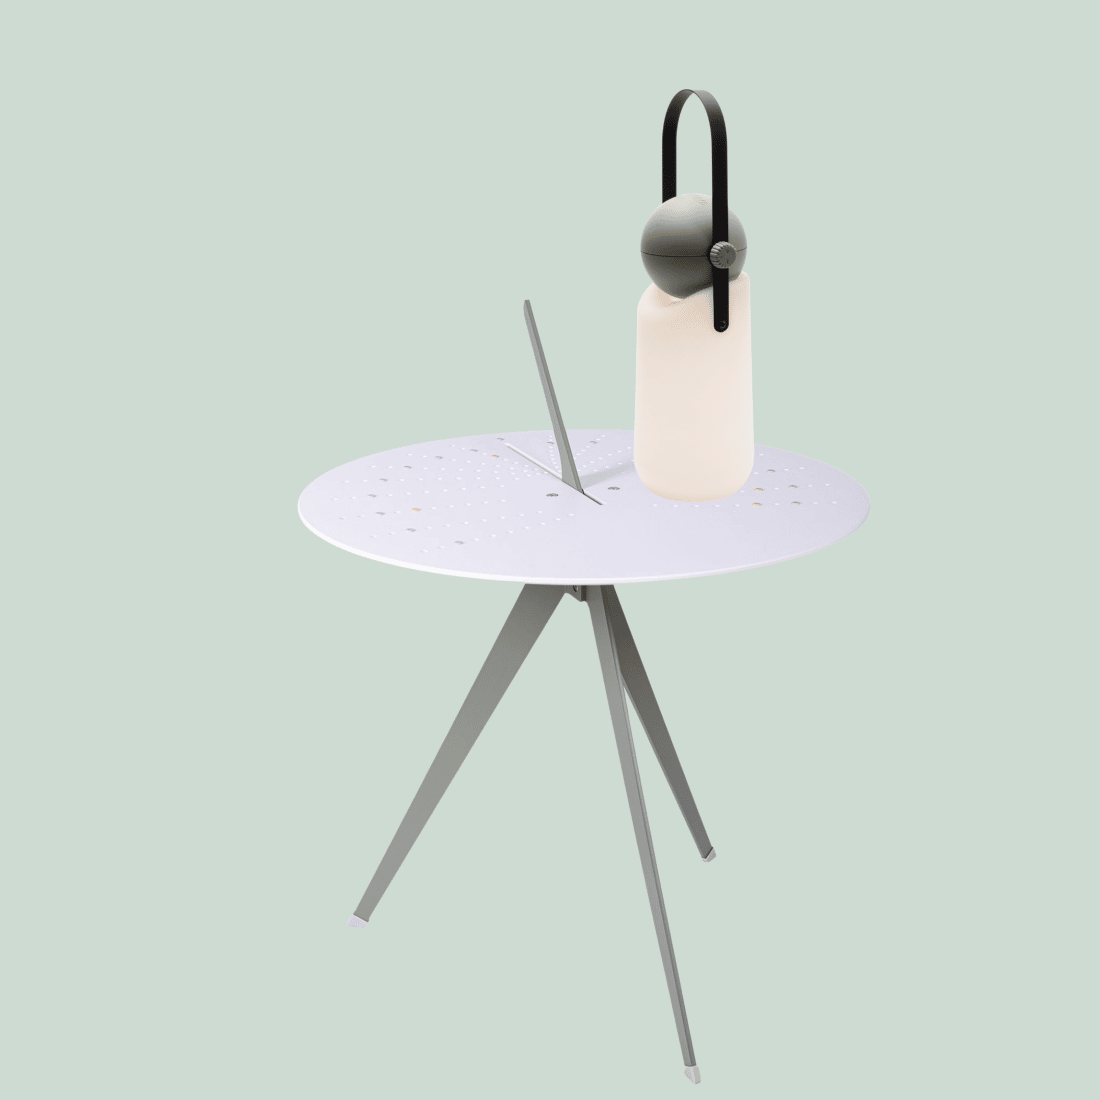 Nice combi deal with sundial table and guidelight from Weltevree